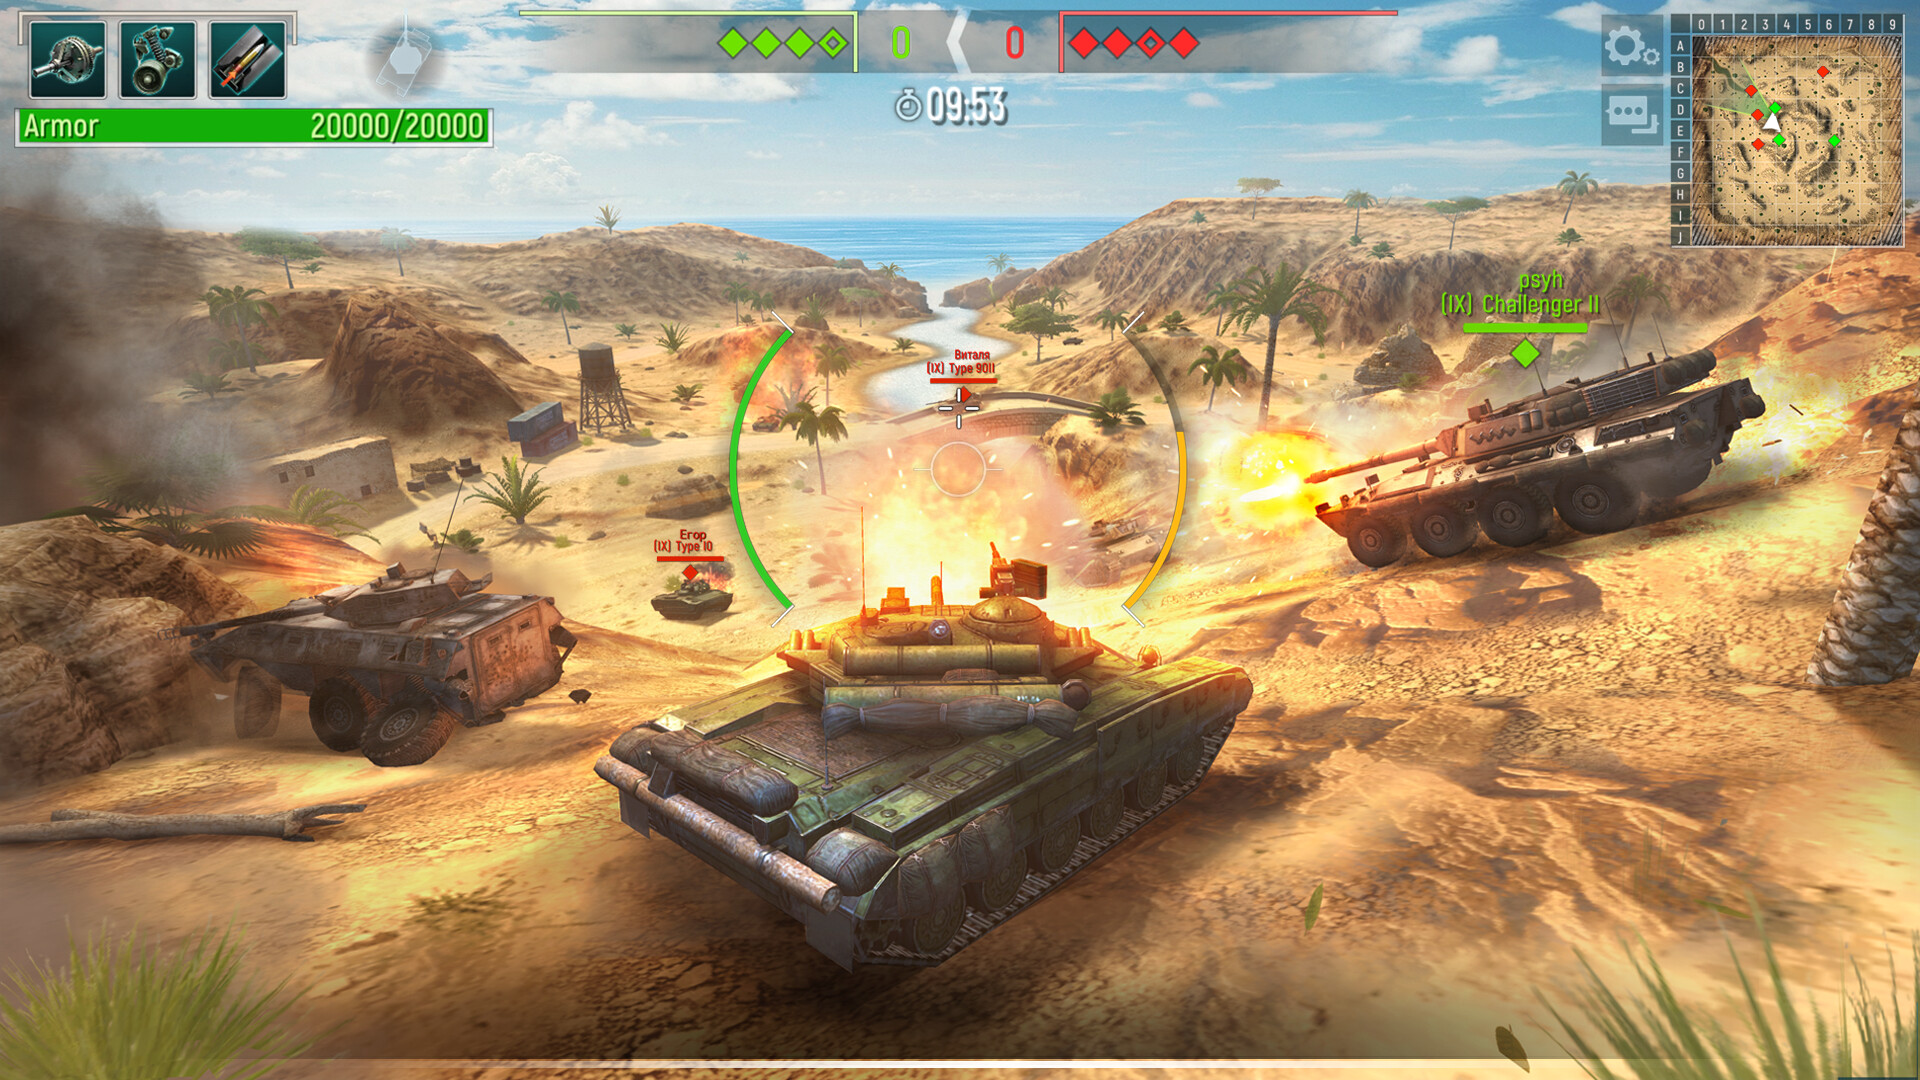 Tank Force Online Shooter Game on Steam